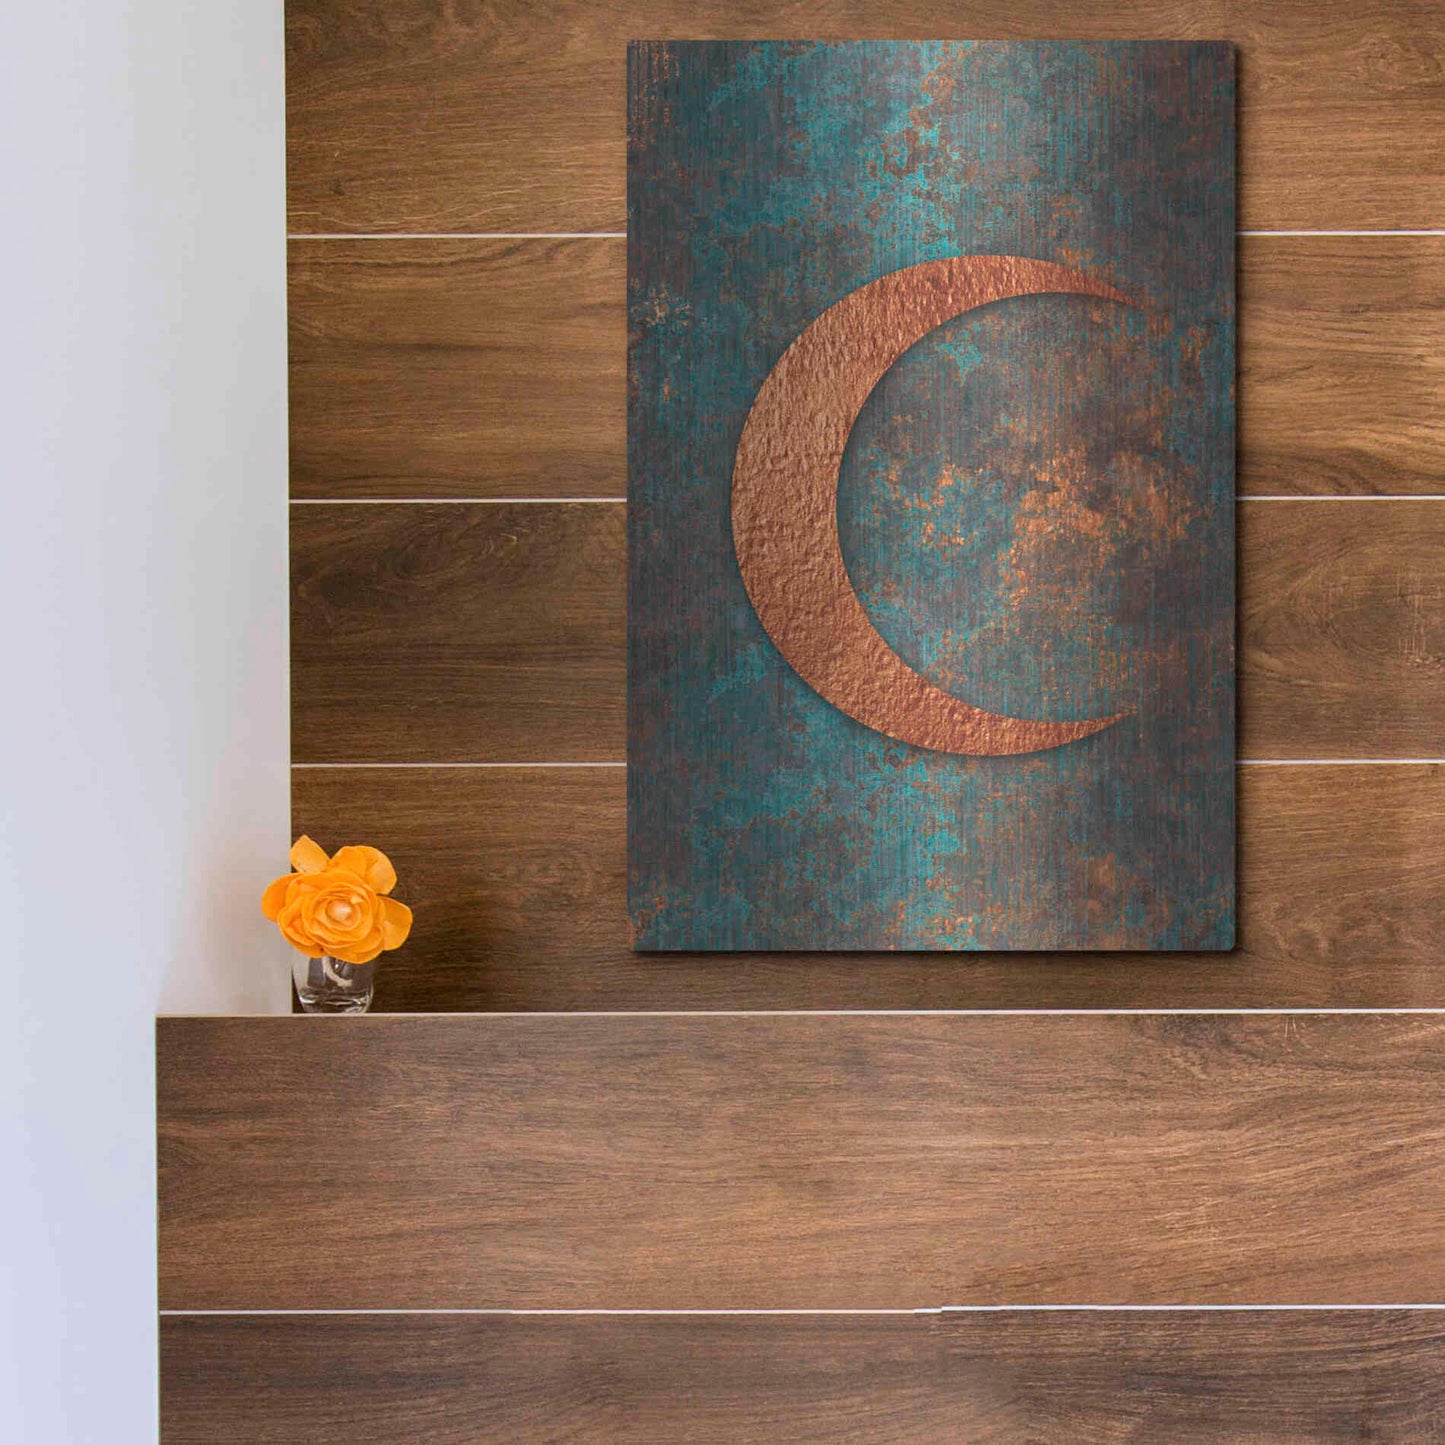 Luxe Metal Art 'Moon Symbiosis Of Rust And Copper' by Andrea Haase, Metal Wall At,12x16